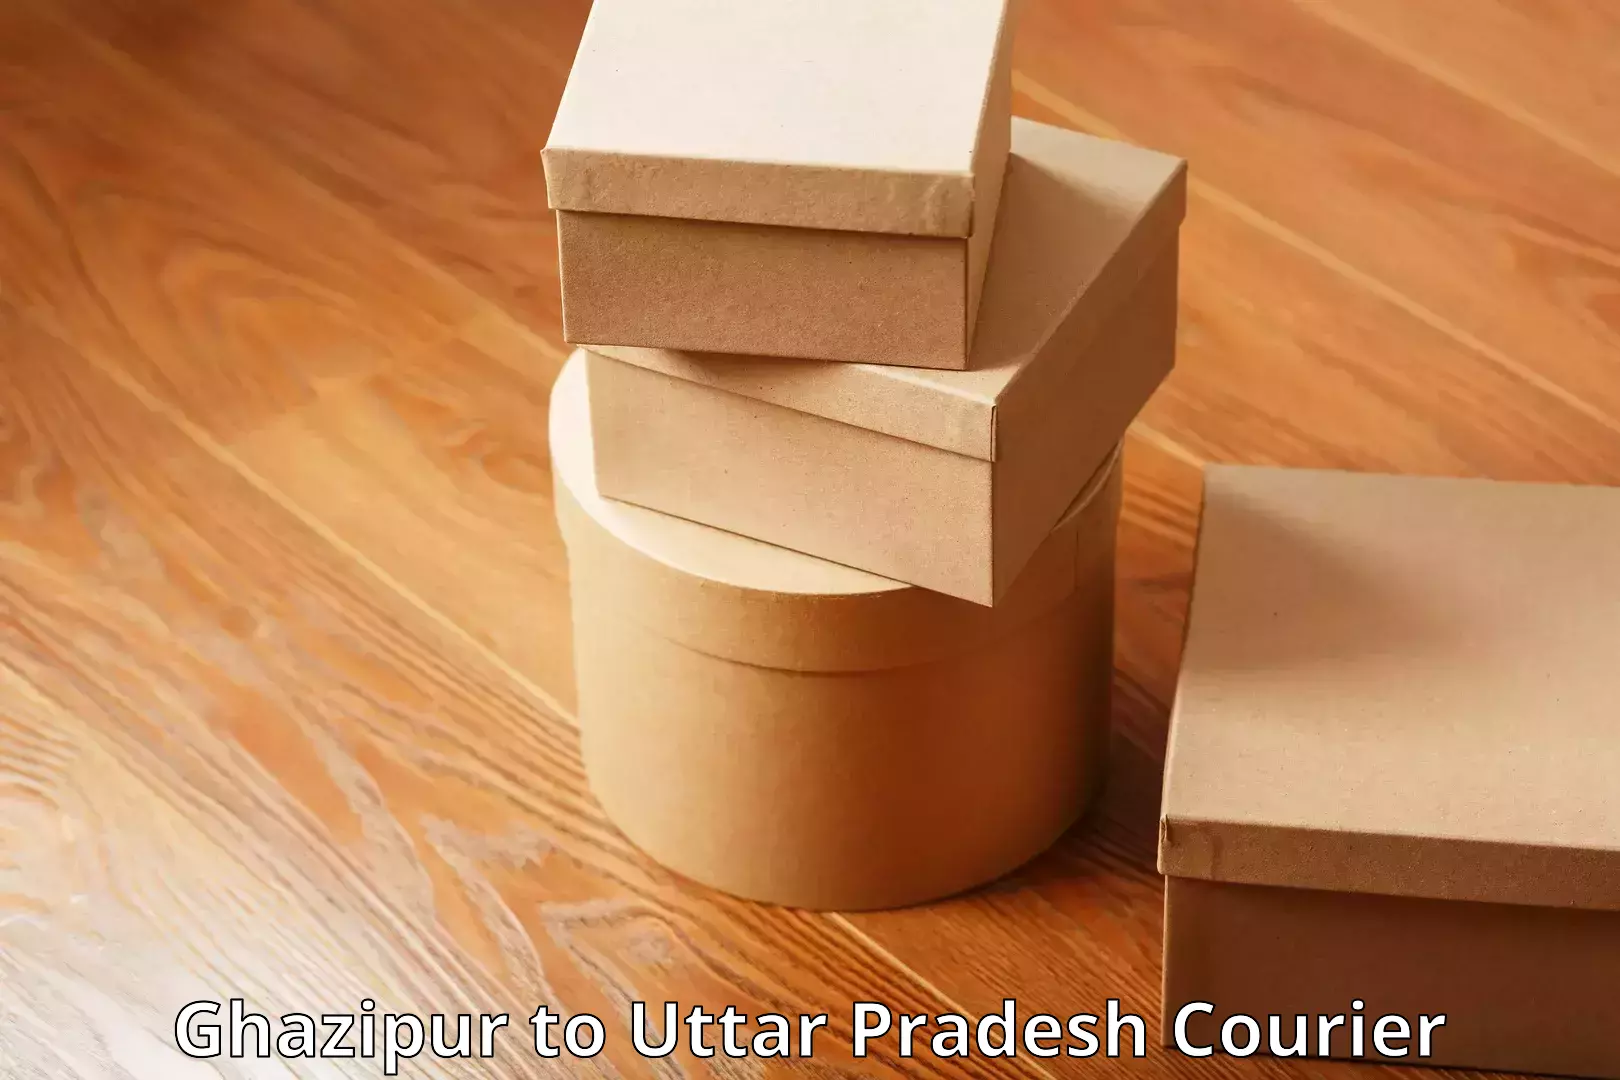 Hassle-free luggage shipping in Ghazipur to Uttar Pradesh